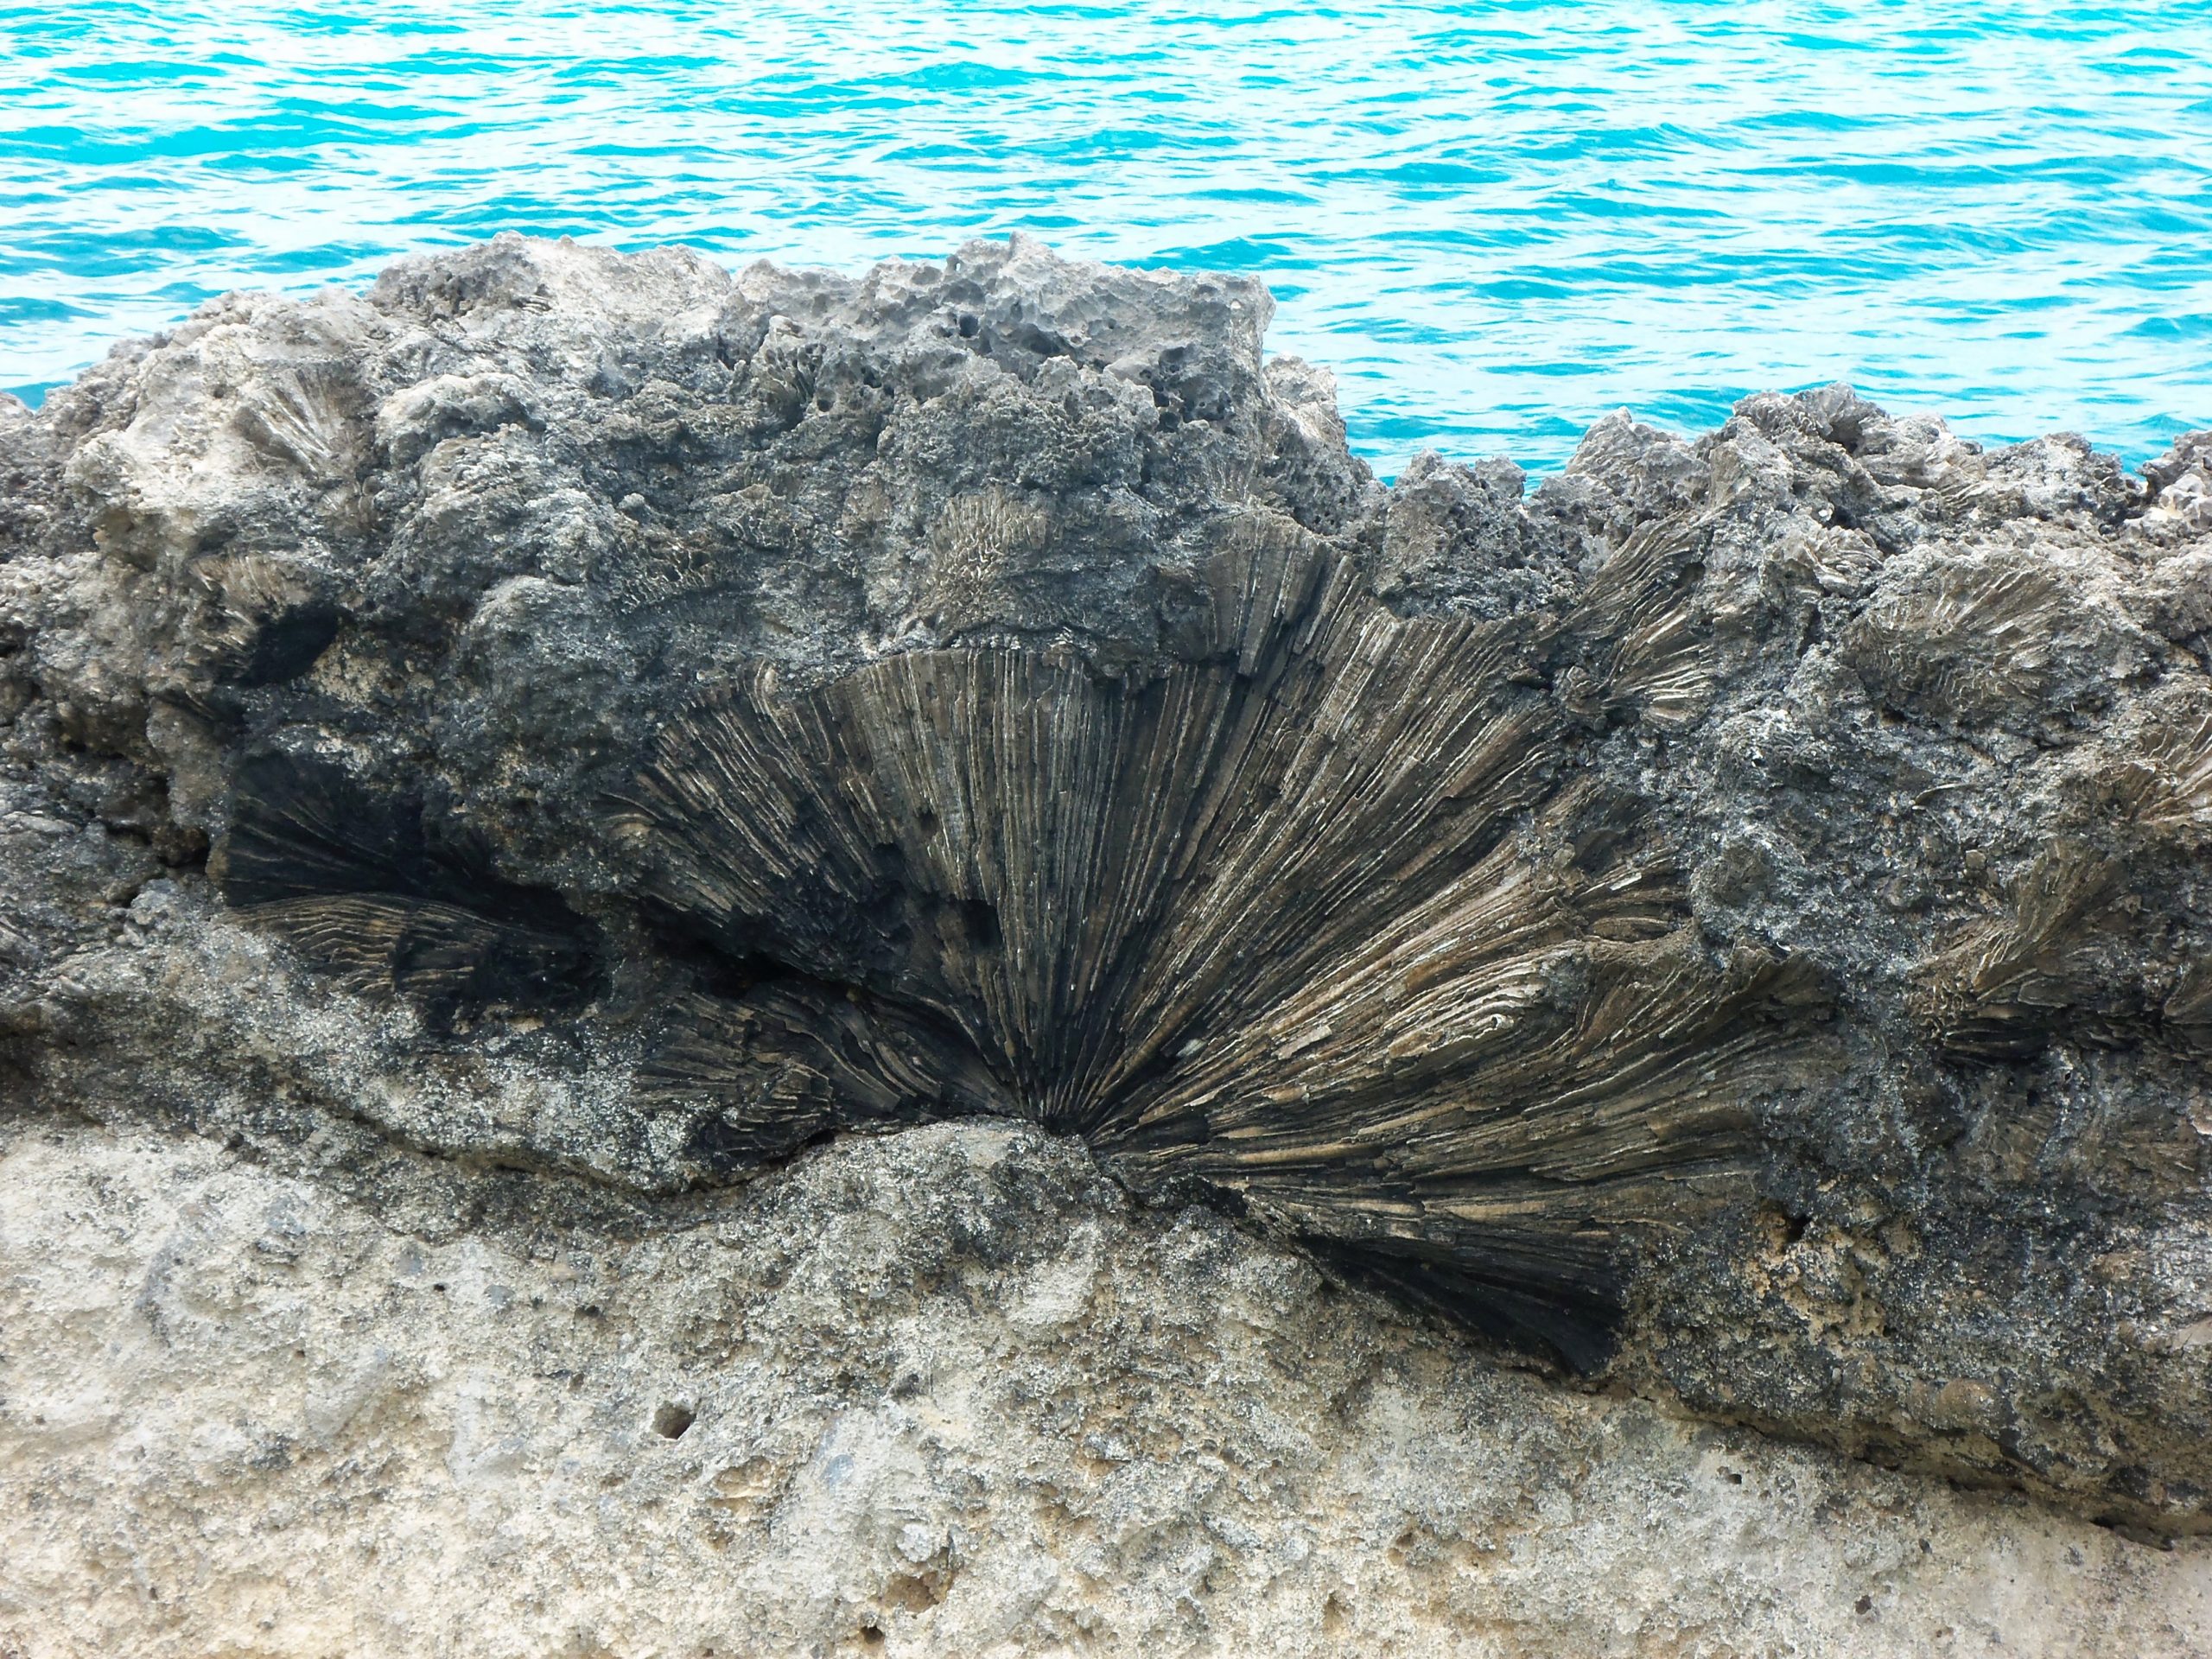 Photograph of a fossilized coral reef exposed in the Bahamas.